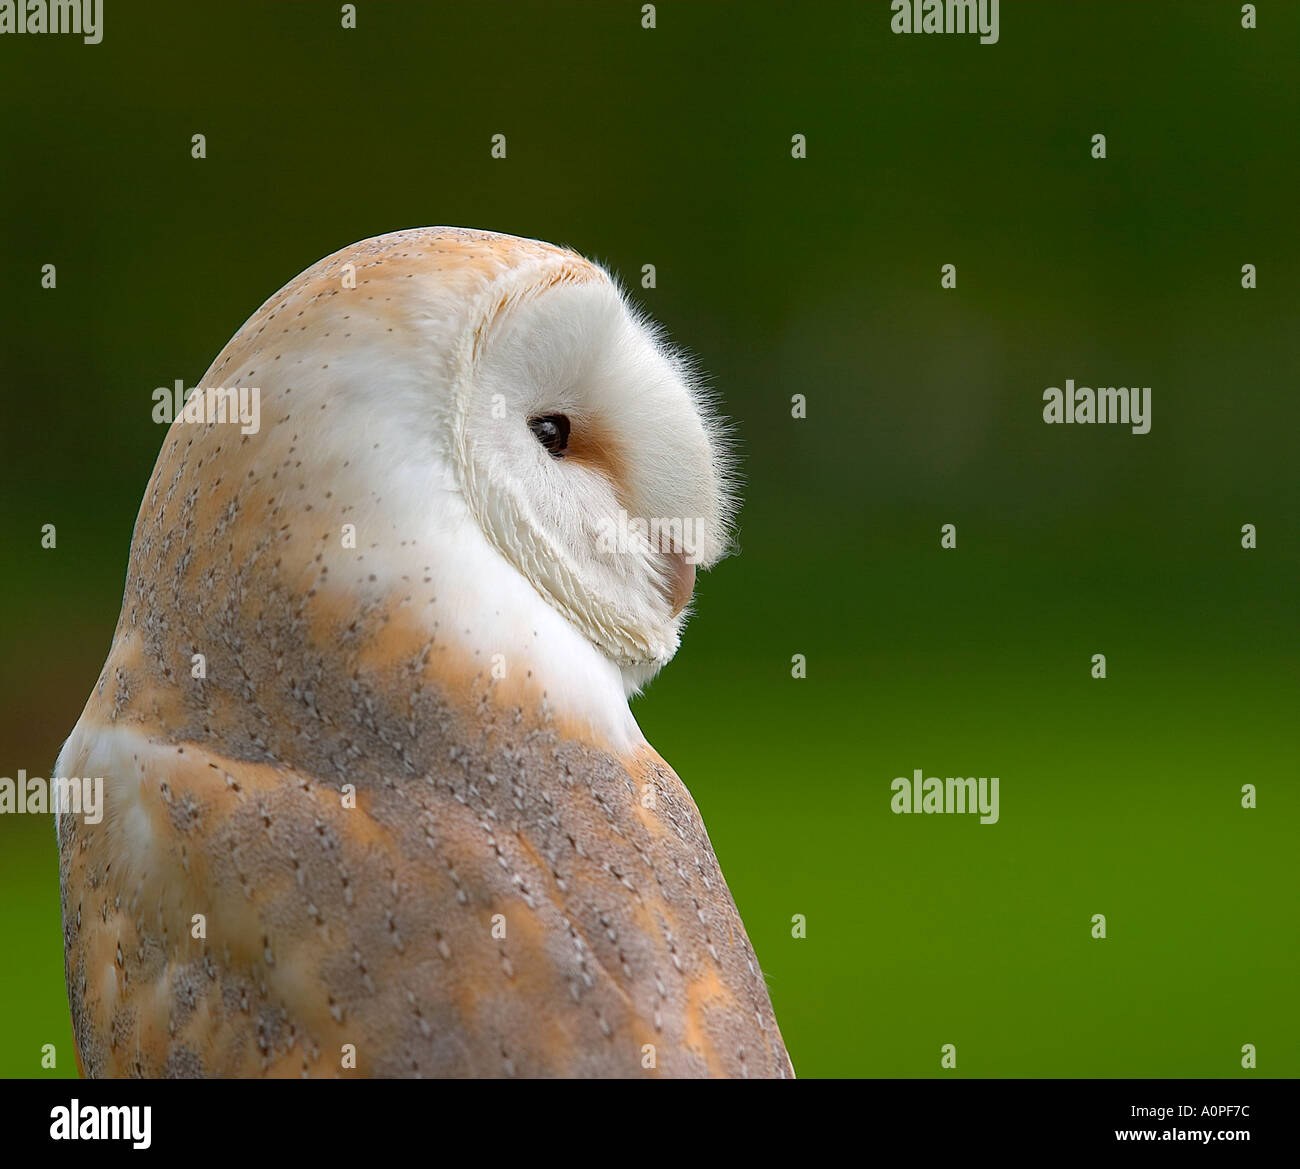 barn owl looking right in to frame Tyto alba heart shaped face plumage into frame wise hunter Stock Photo